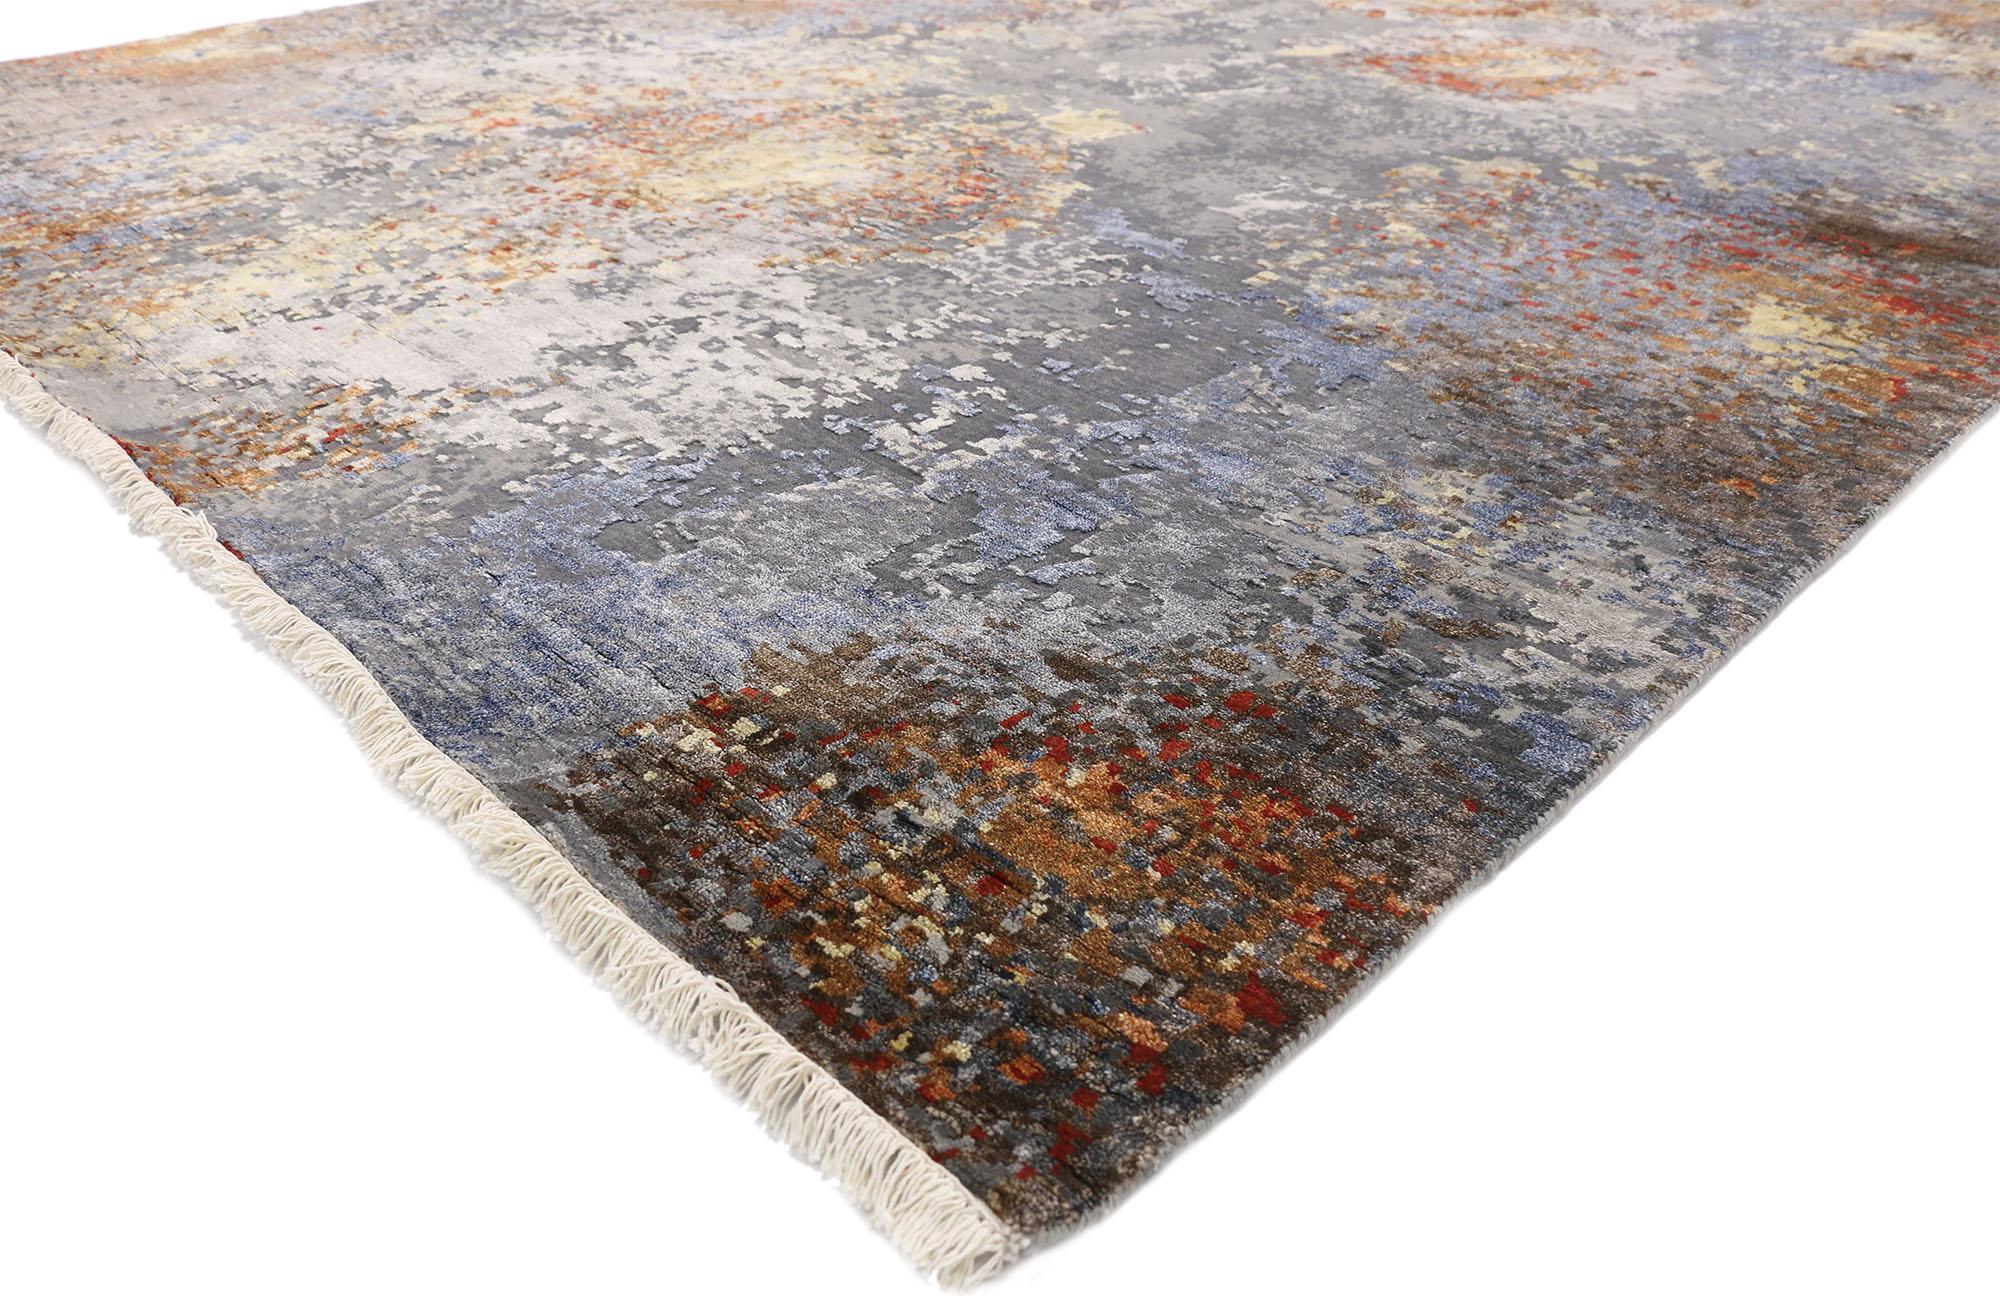 30424 New ​Abstract Expressionist Contemporary Area Rug with Grunge Art Style and Inspired by Willem de Kooning 08'00 x 09'10. This hand knotted wool and silk contemporary rug with abstract expressionist Grunge Art style is the epitome of relaxed